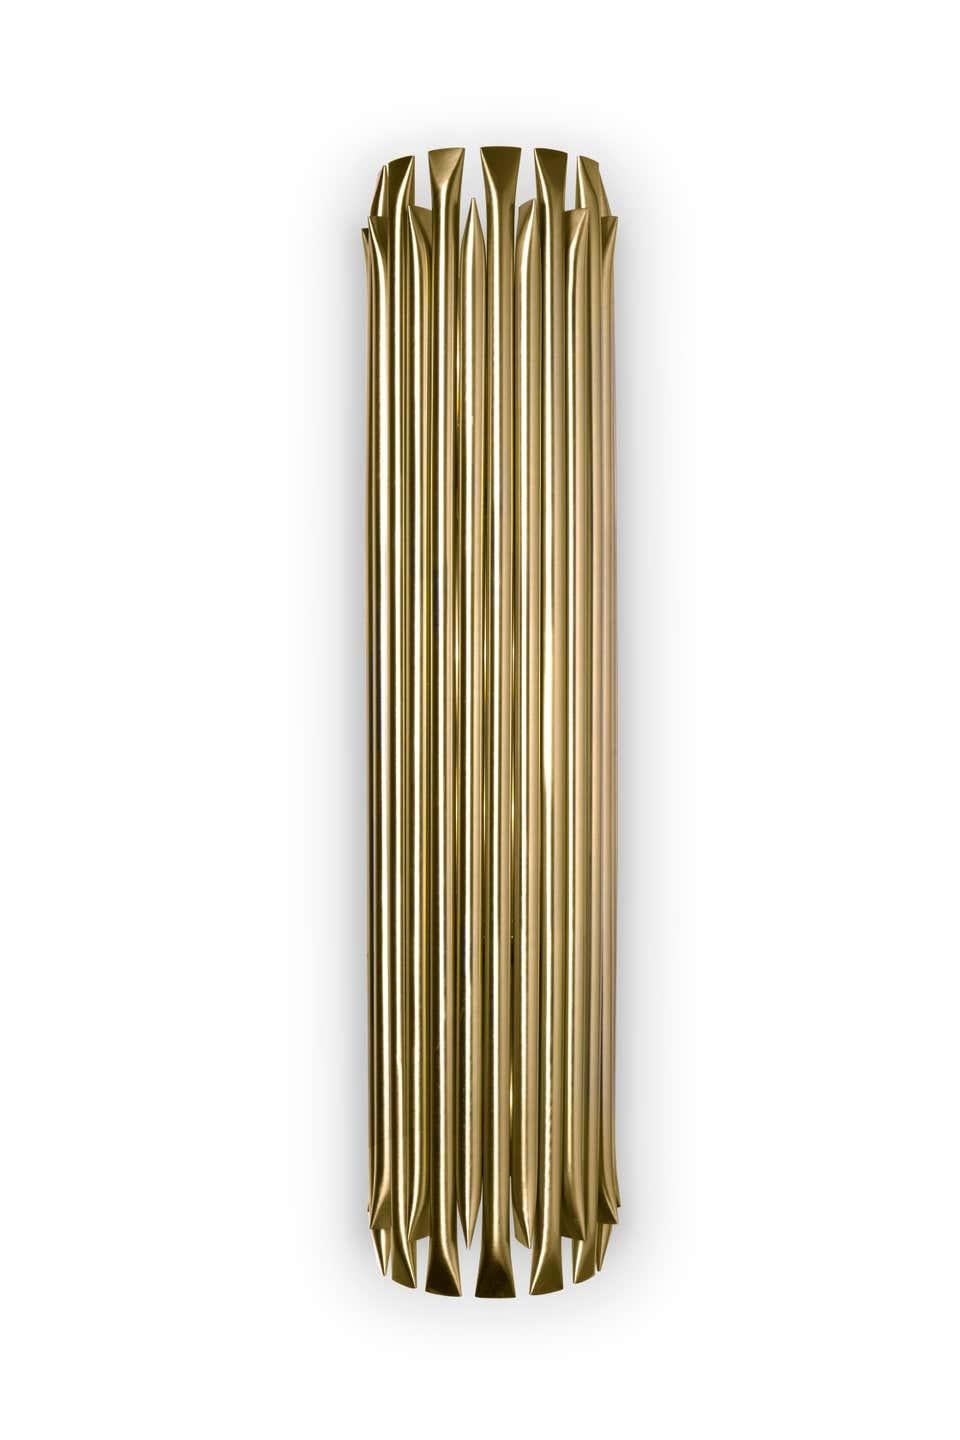 This unique lamp combines a Mid-Century Modern design with a Classic style that will make a statement in your home. Providing a subtle glow, this modern wall light is 100% handmade in brass and has a brushed nickel finish. With 4 lamps, we recommend